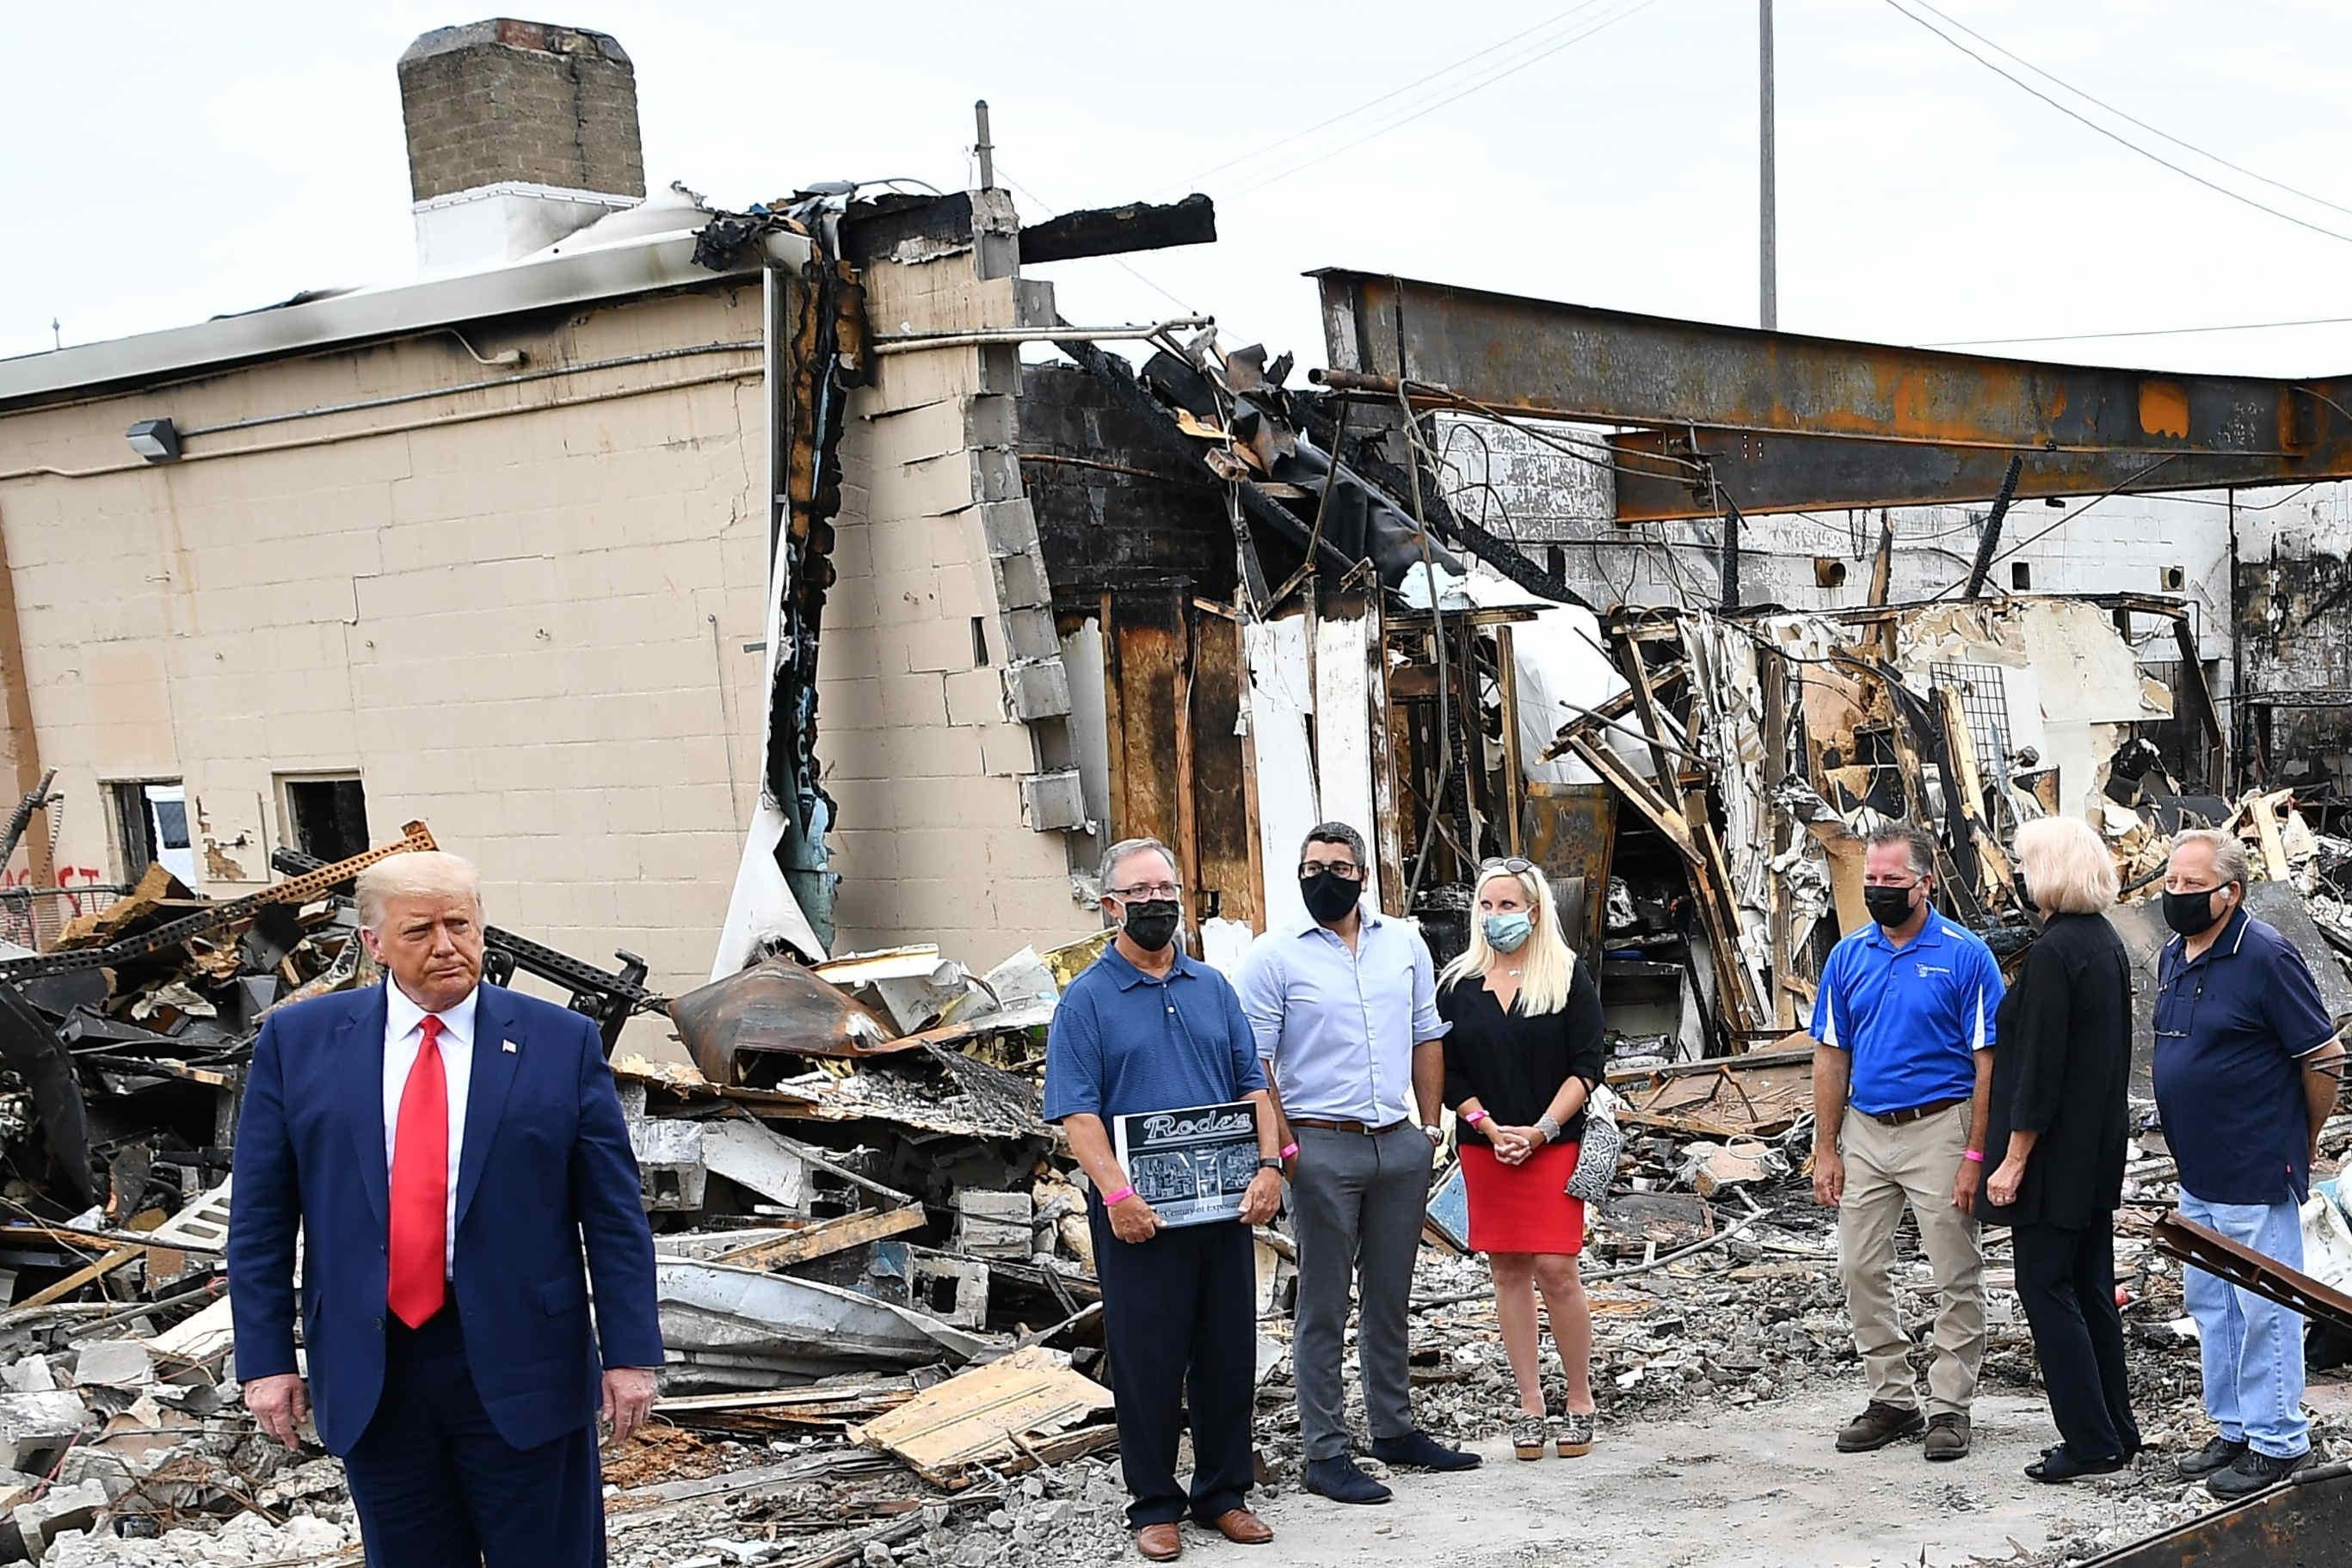 Trump stands before a wrecked building, next to people in masks.